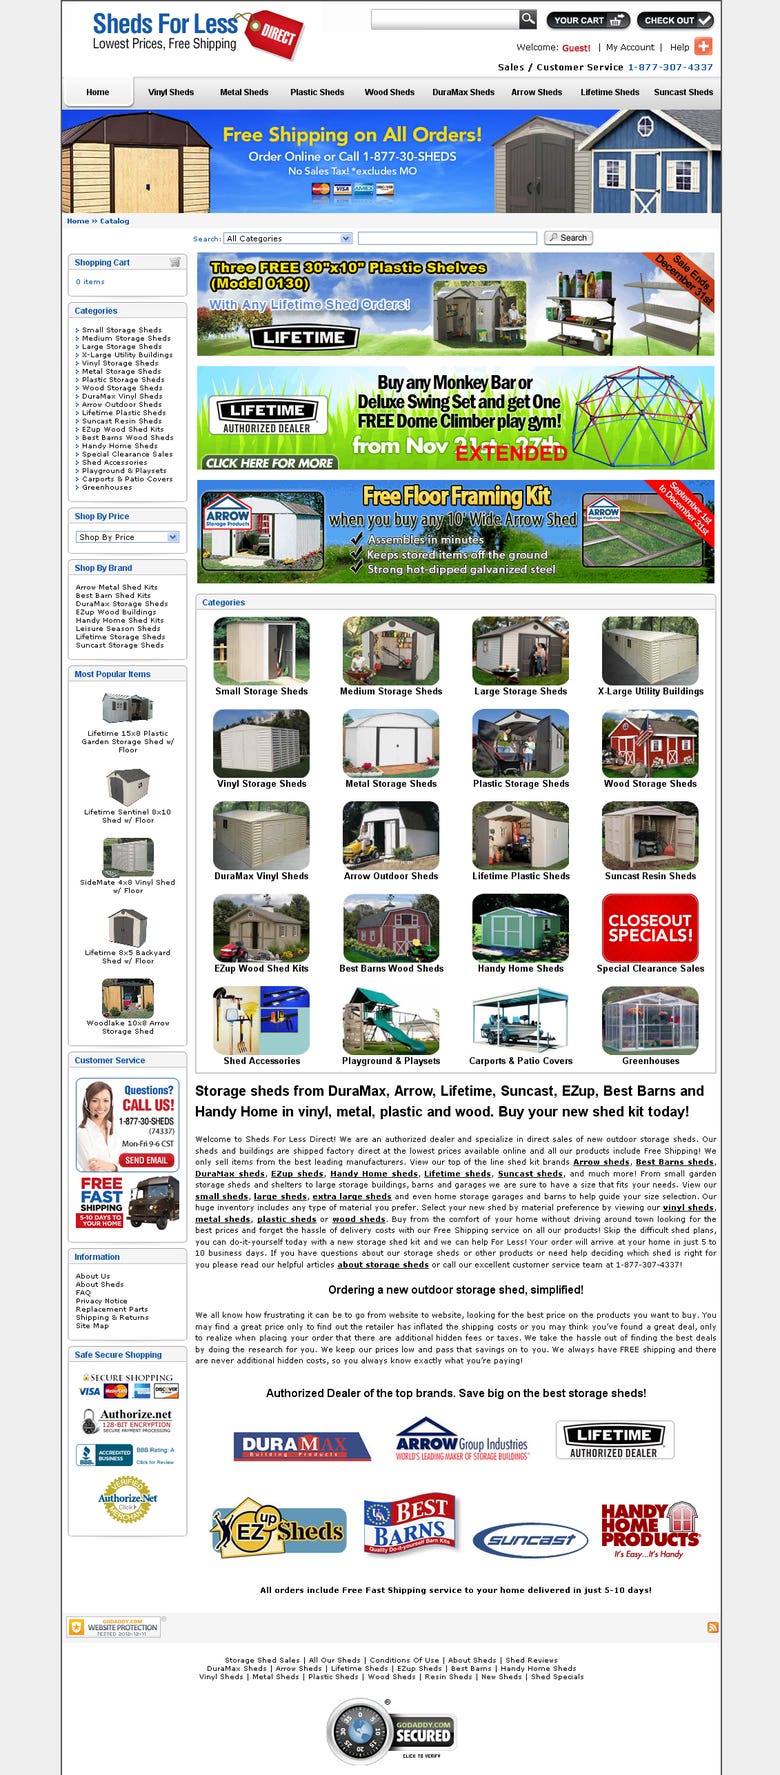 Sheds For Less Direct